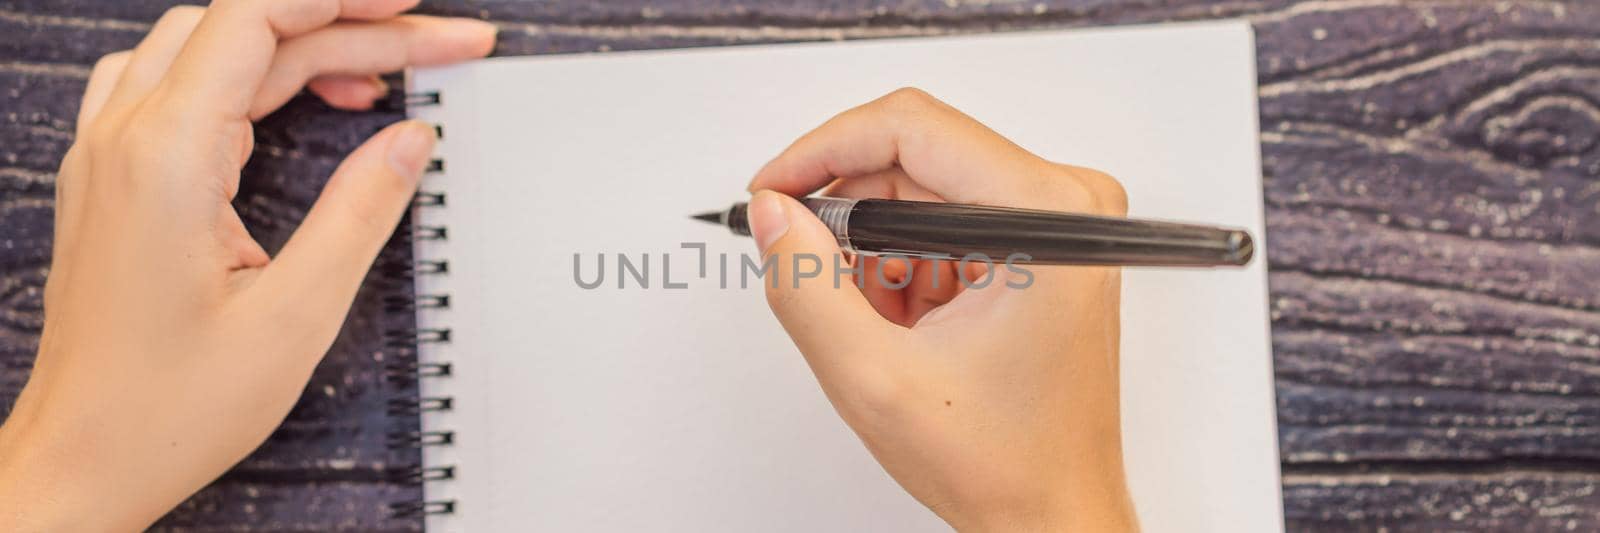 Women's hands in a wooden background holding a signboard, drawing block, paper, mockup BANNER, LONG FORMAT by galitskaya